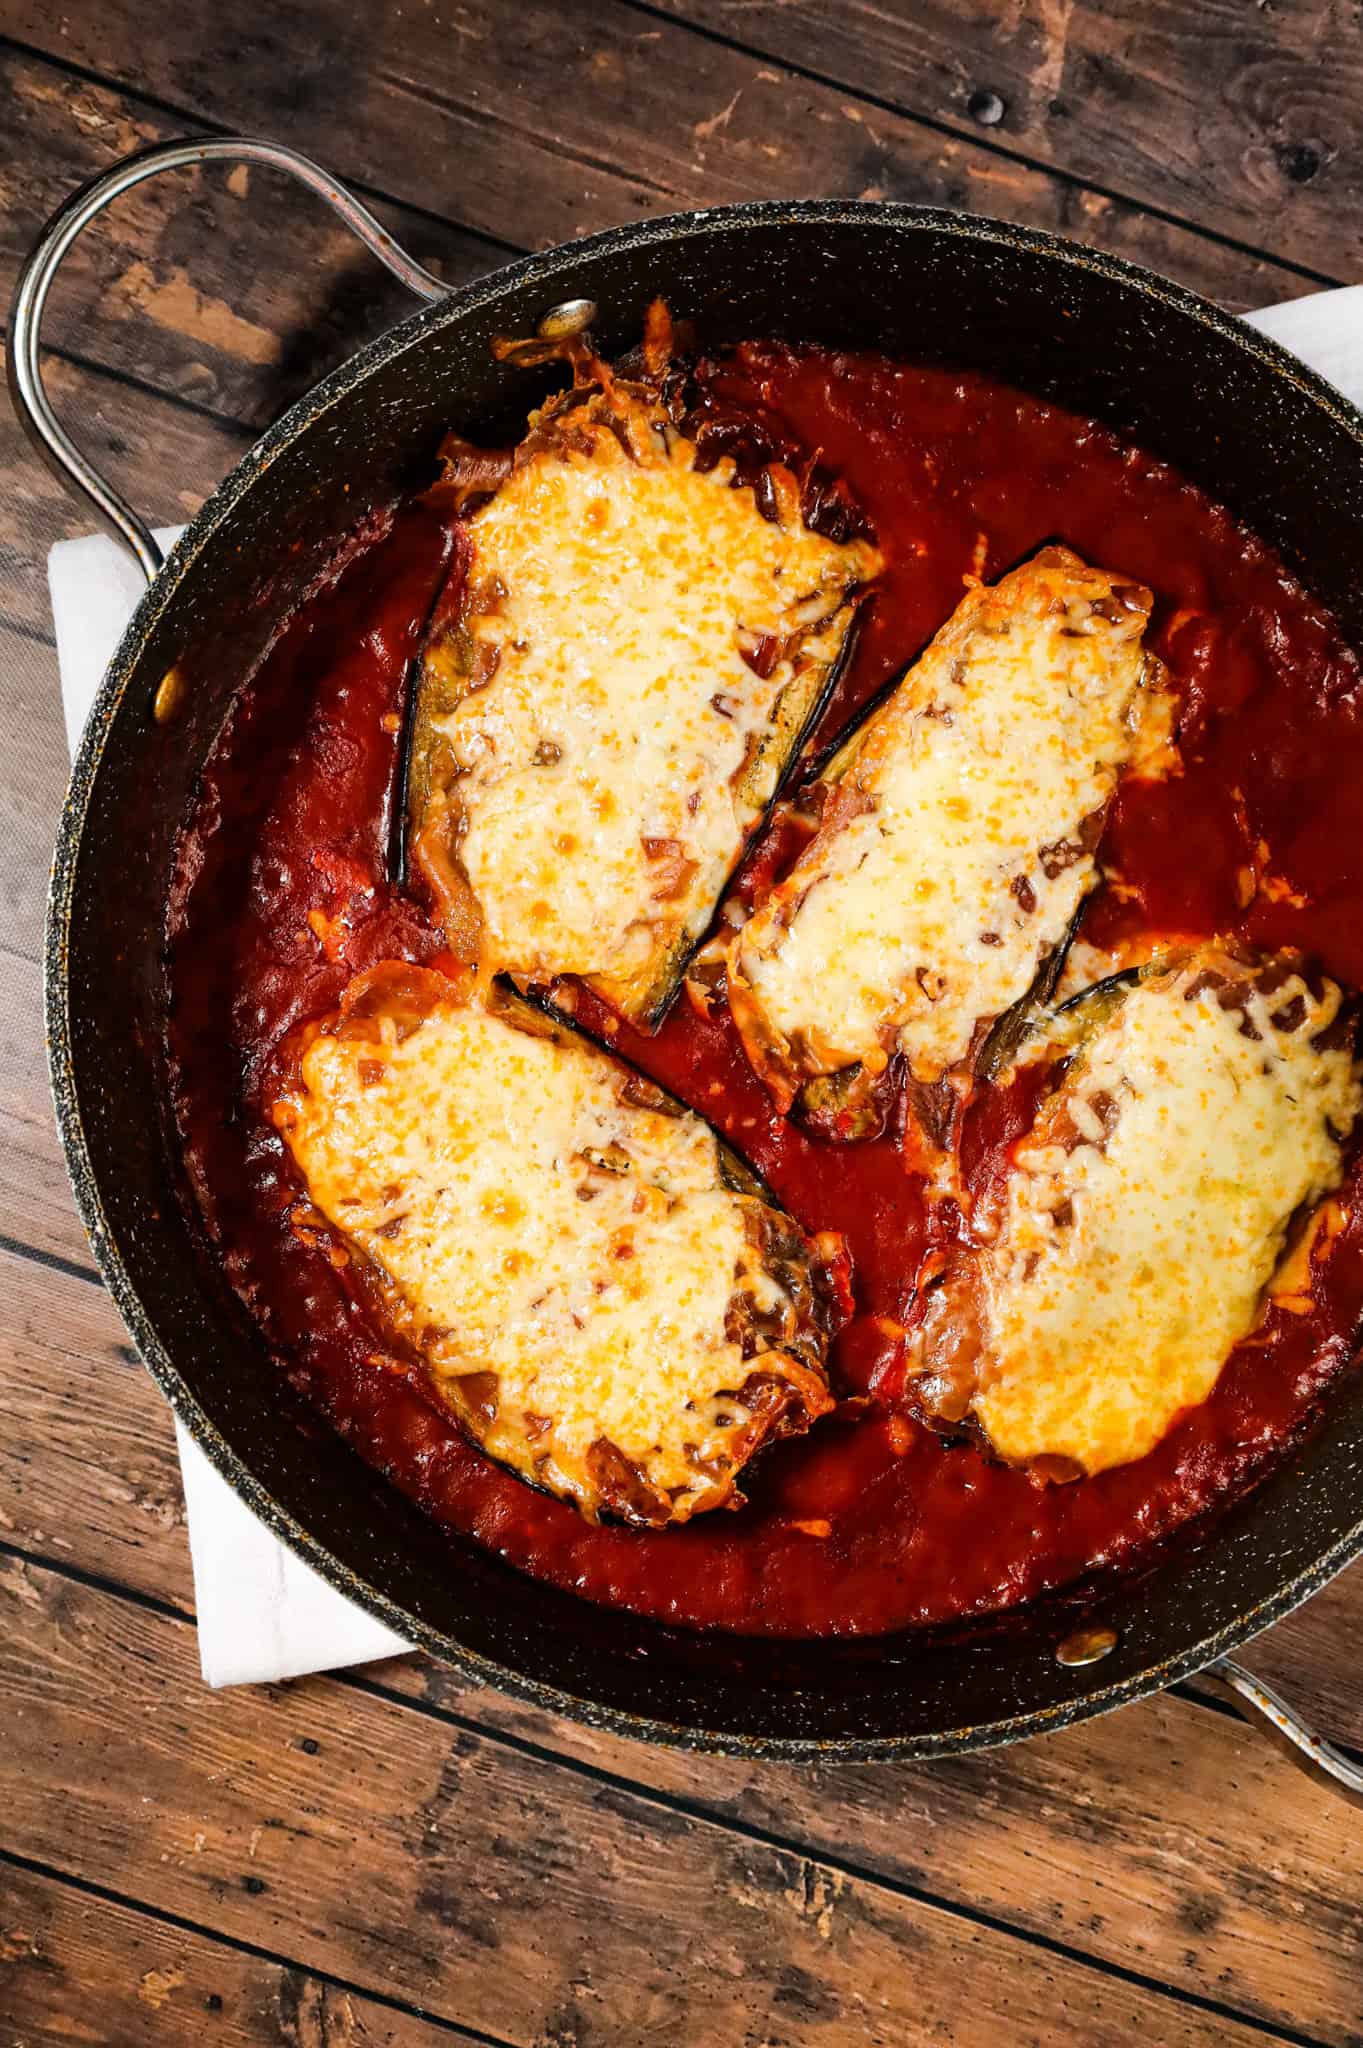 Chicken Sorrentino is a delicious chicken breast dish with roasted eggplant, prosciutto, a tomato marsala sauce and shredded cheese.